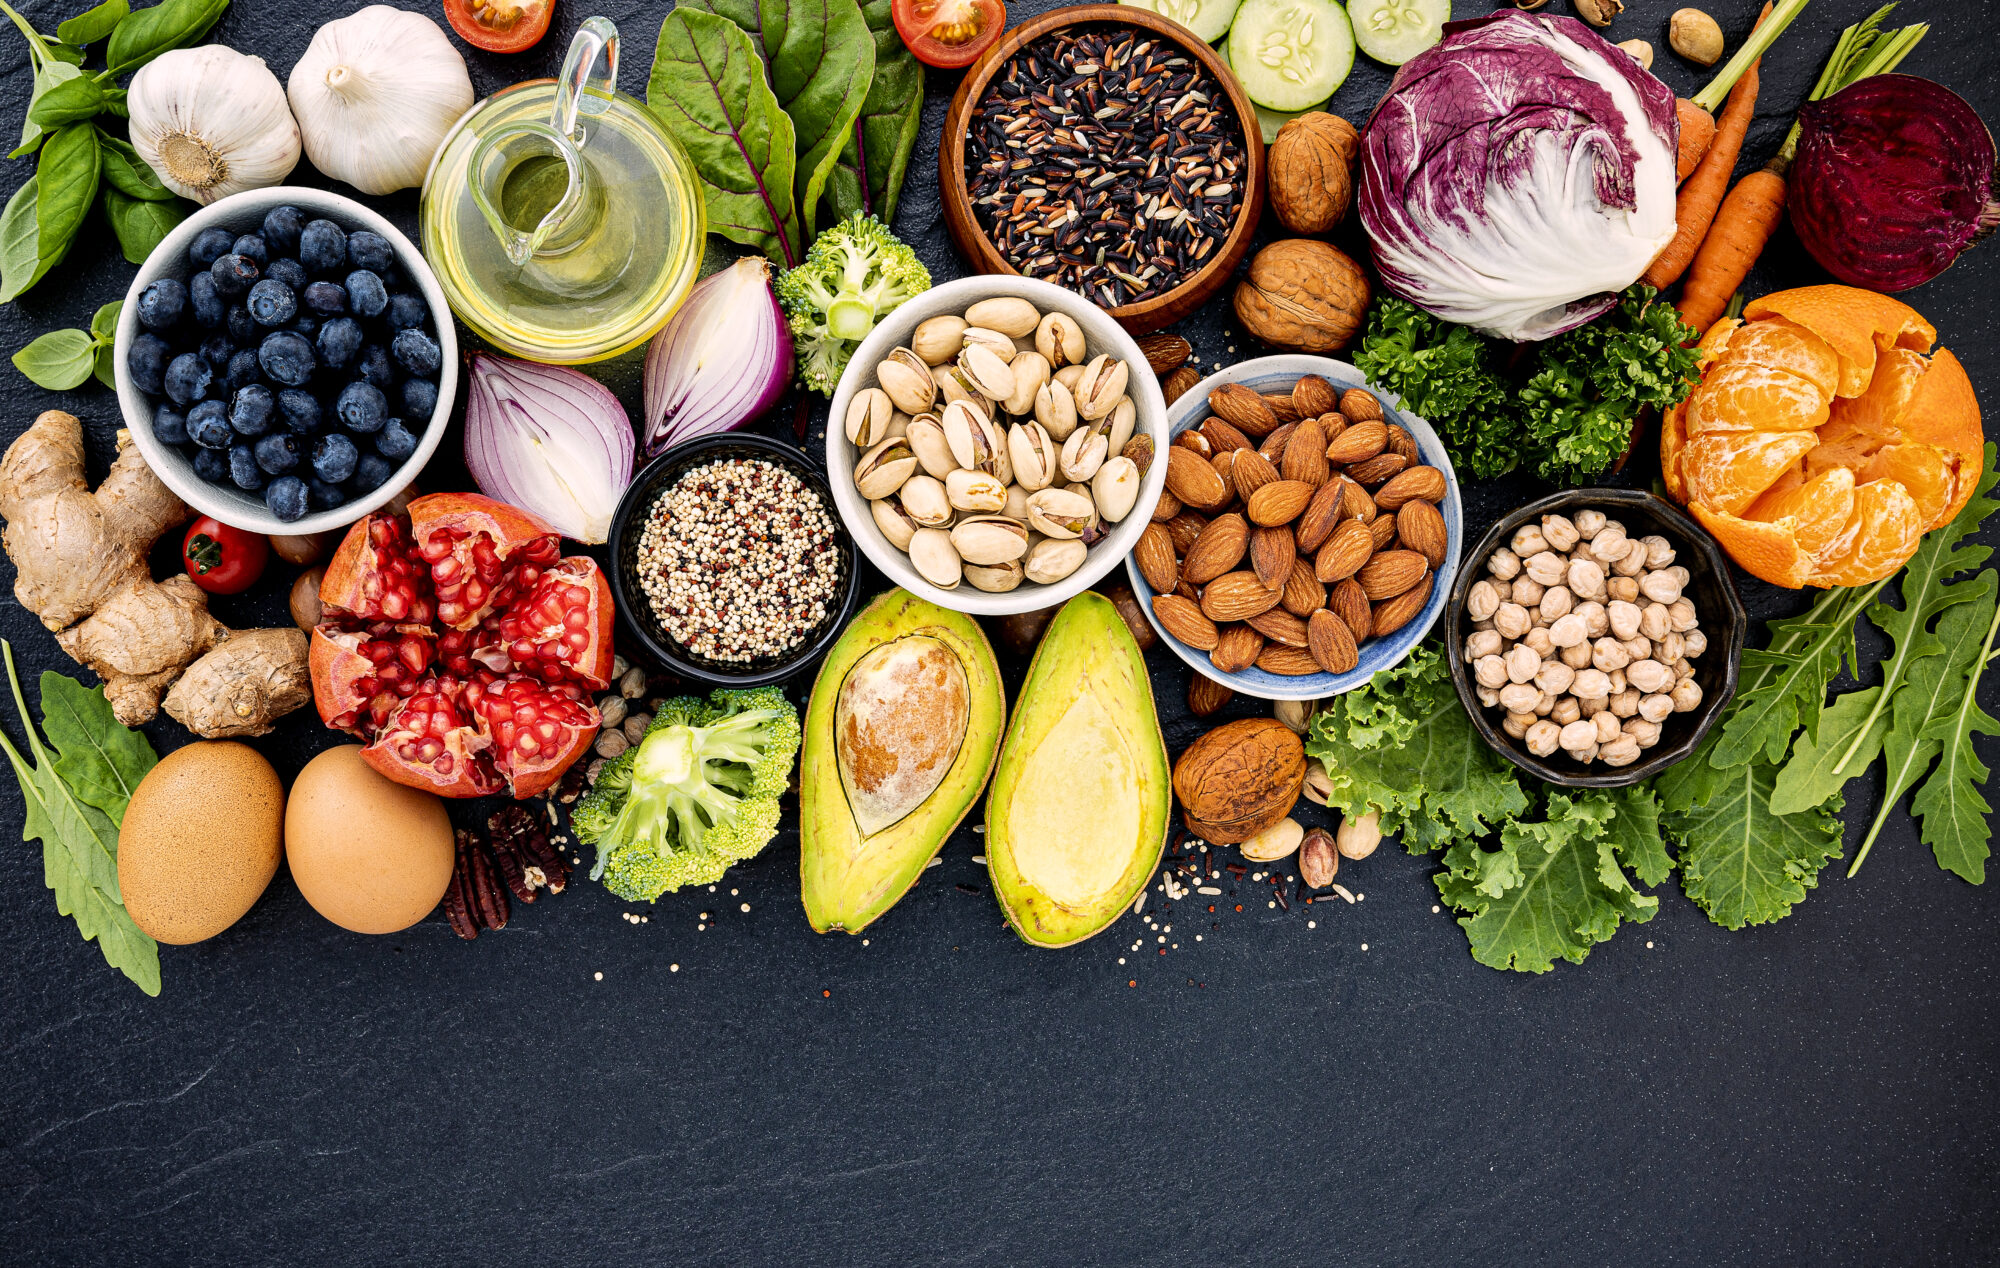 An assortment of vegetables, fruits, and legumes against a dark grey background. Bowls of pistachios, almonds, and dried chickpeas and wild rice sit next to an open avocado, raddichio, a jug of olive oil, fresh herbs and salad greens, and more.